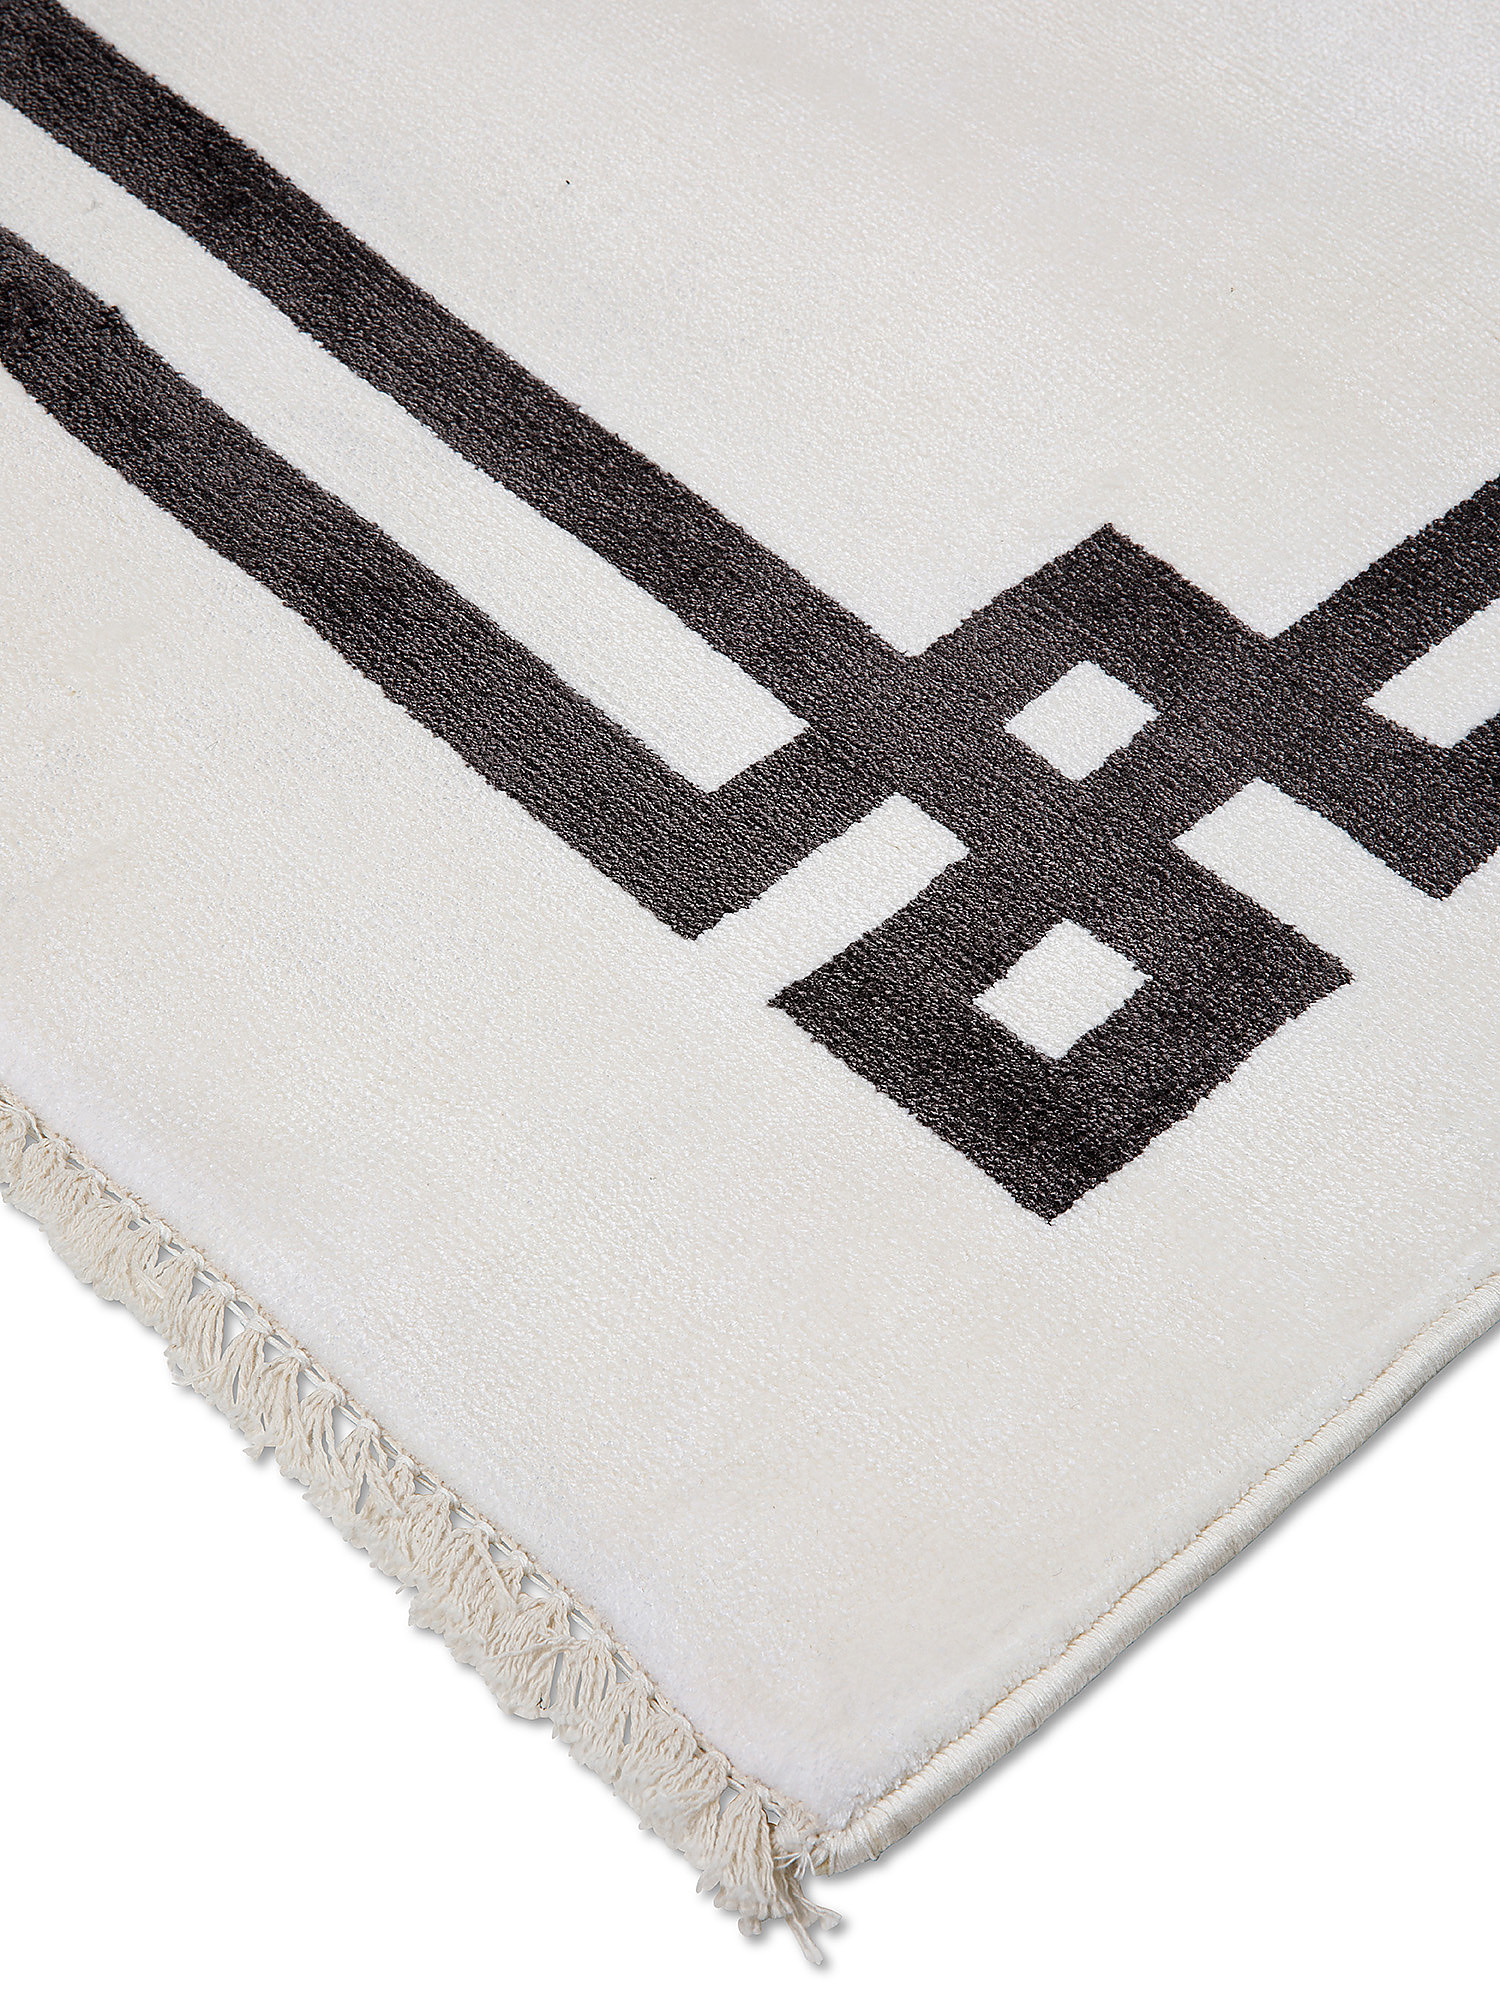 Viscose bamboo rug with geometric pattern, White, large image number 1